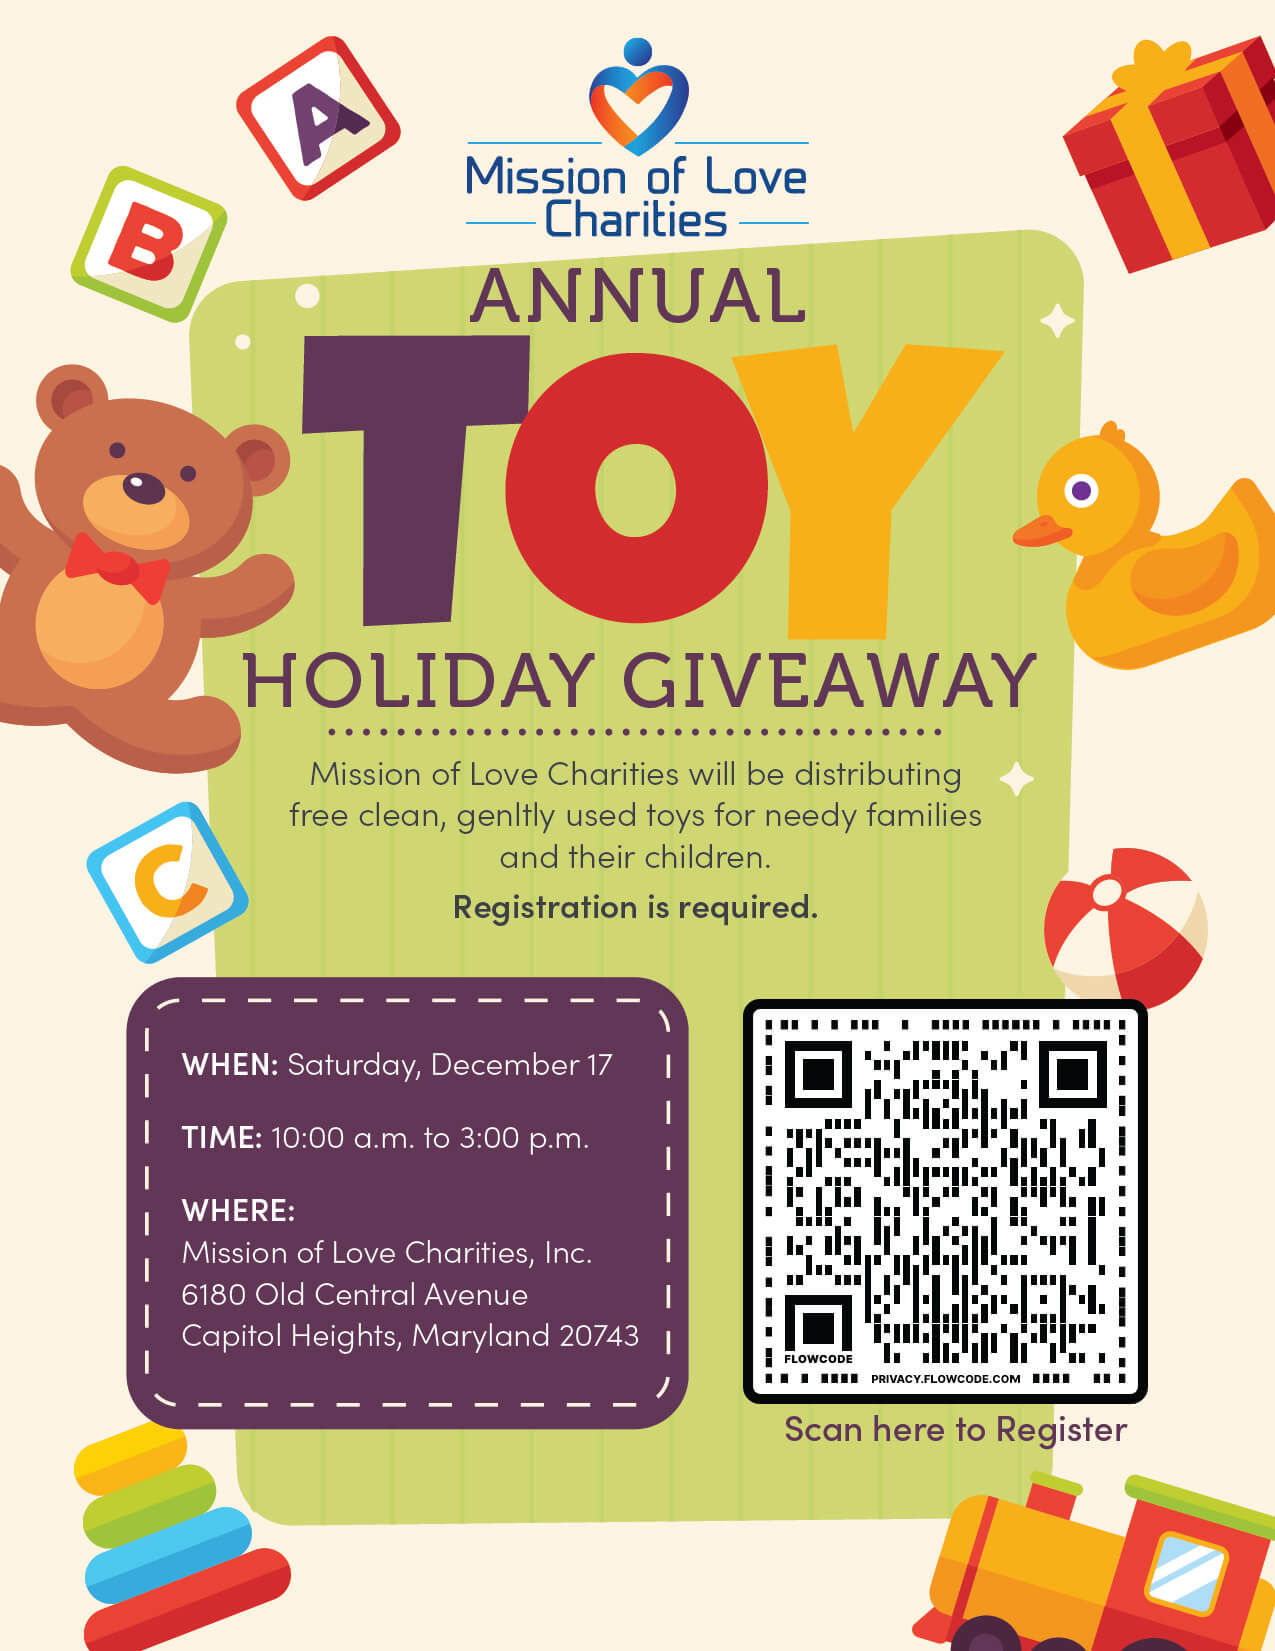 Annual Toy Holiday Giveaway